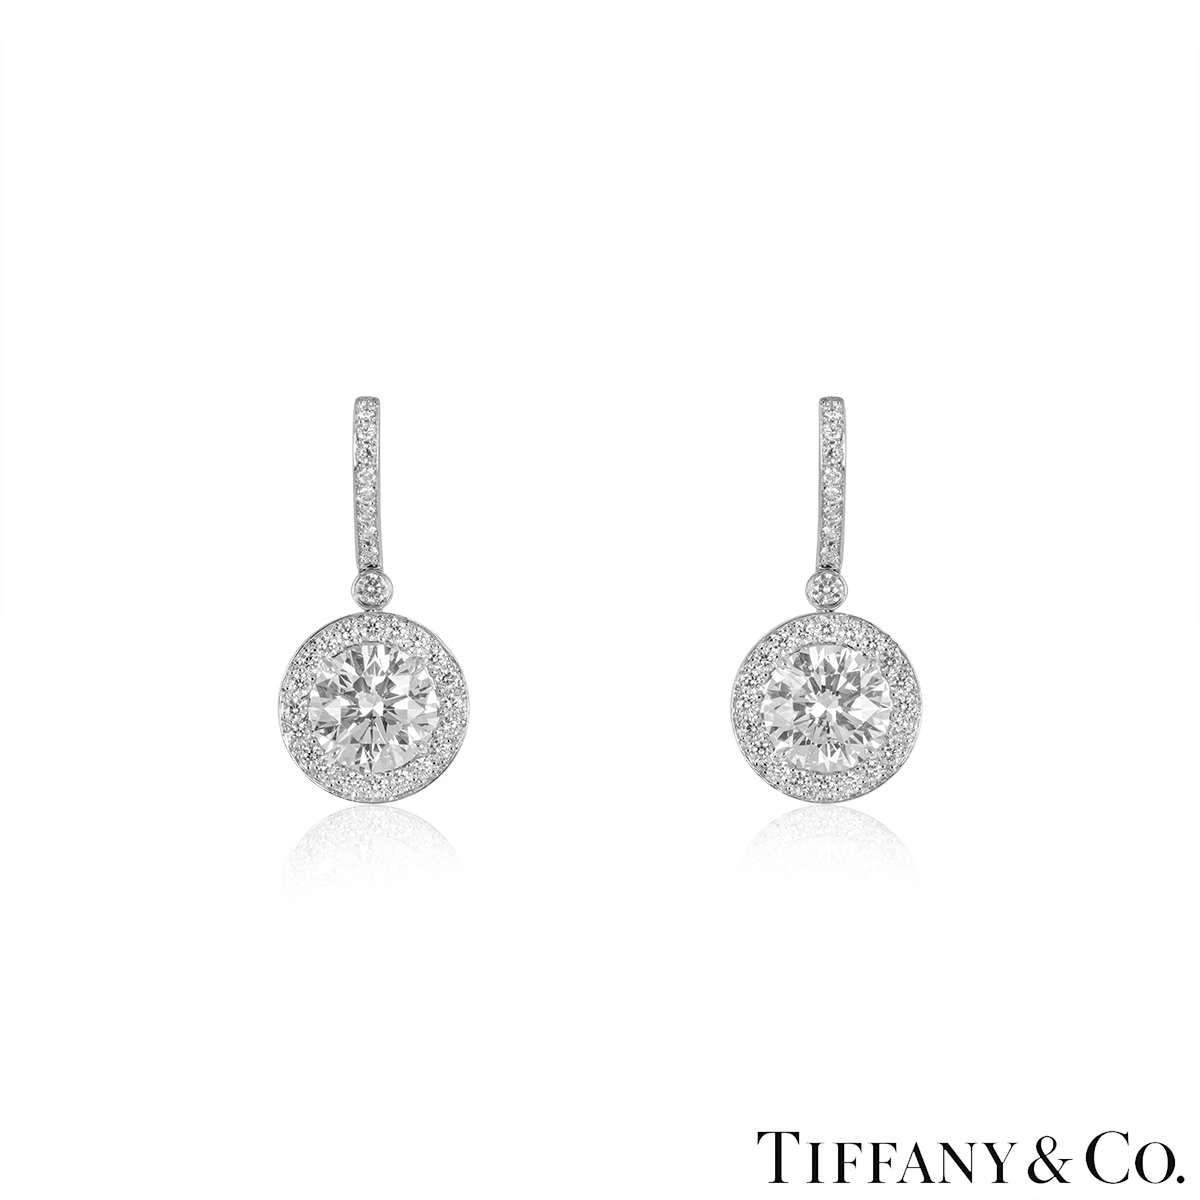 Tiffany Co Earrings | peacecommission.kdsg.gov.ng